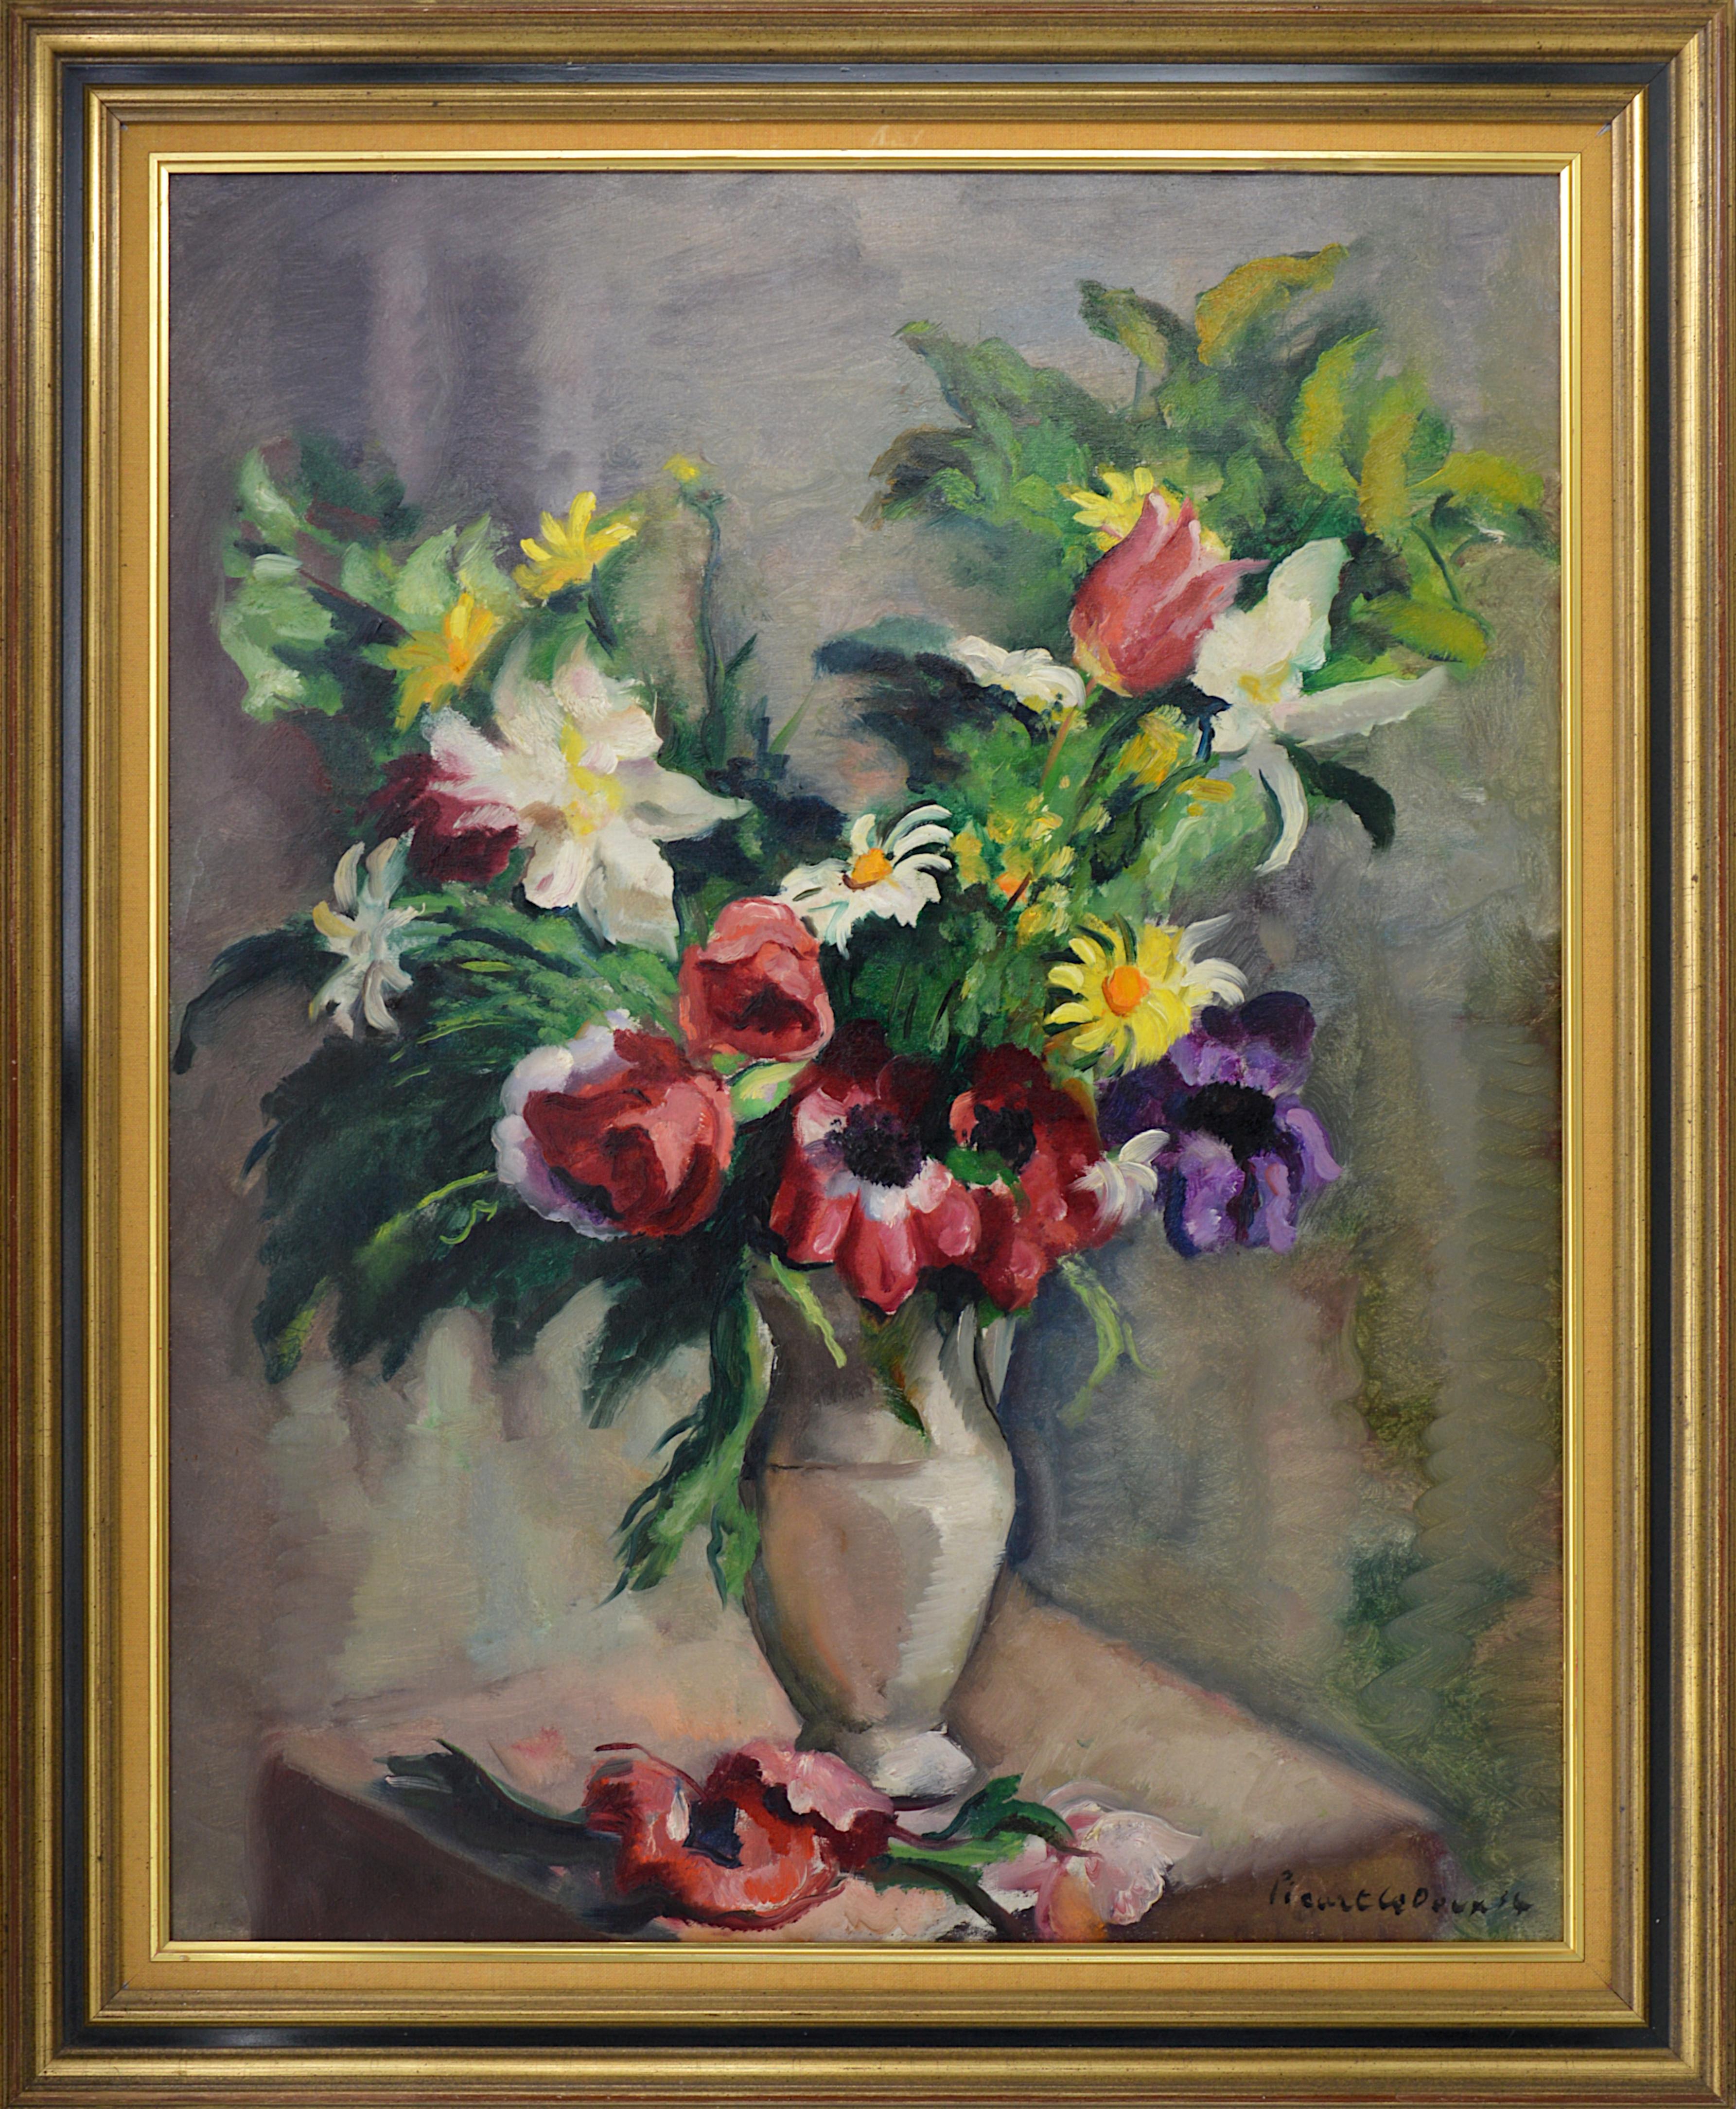 Still-Life Painting Charles Picart le Doux - Charles PICART LE DOUX, Bouquet de fleurs sauvages, 1934